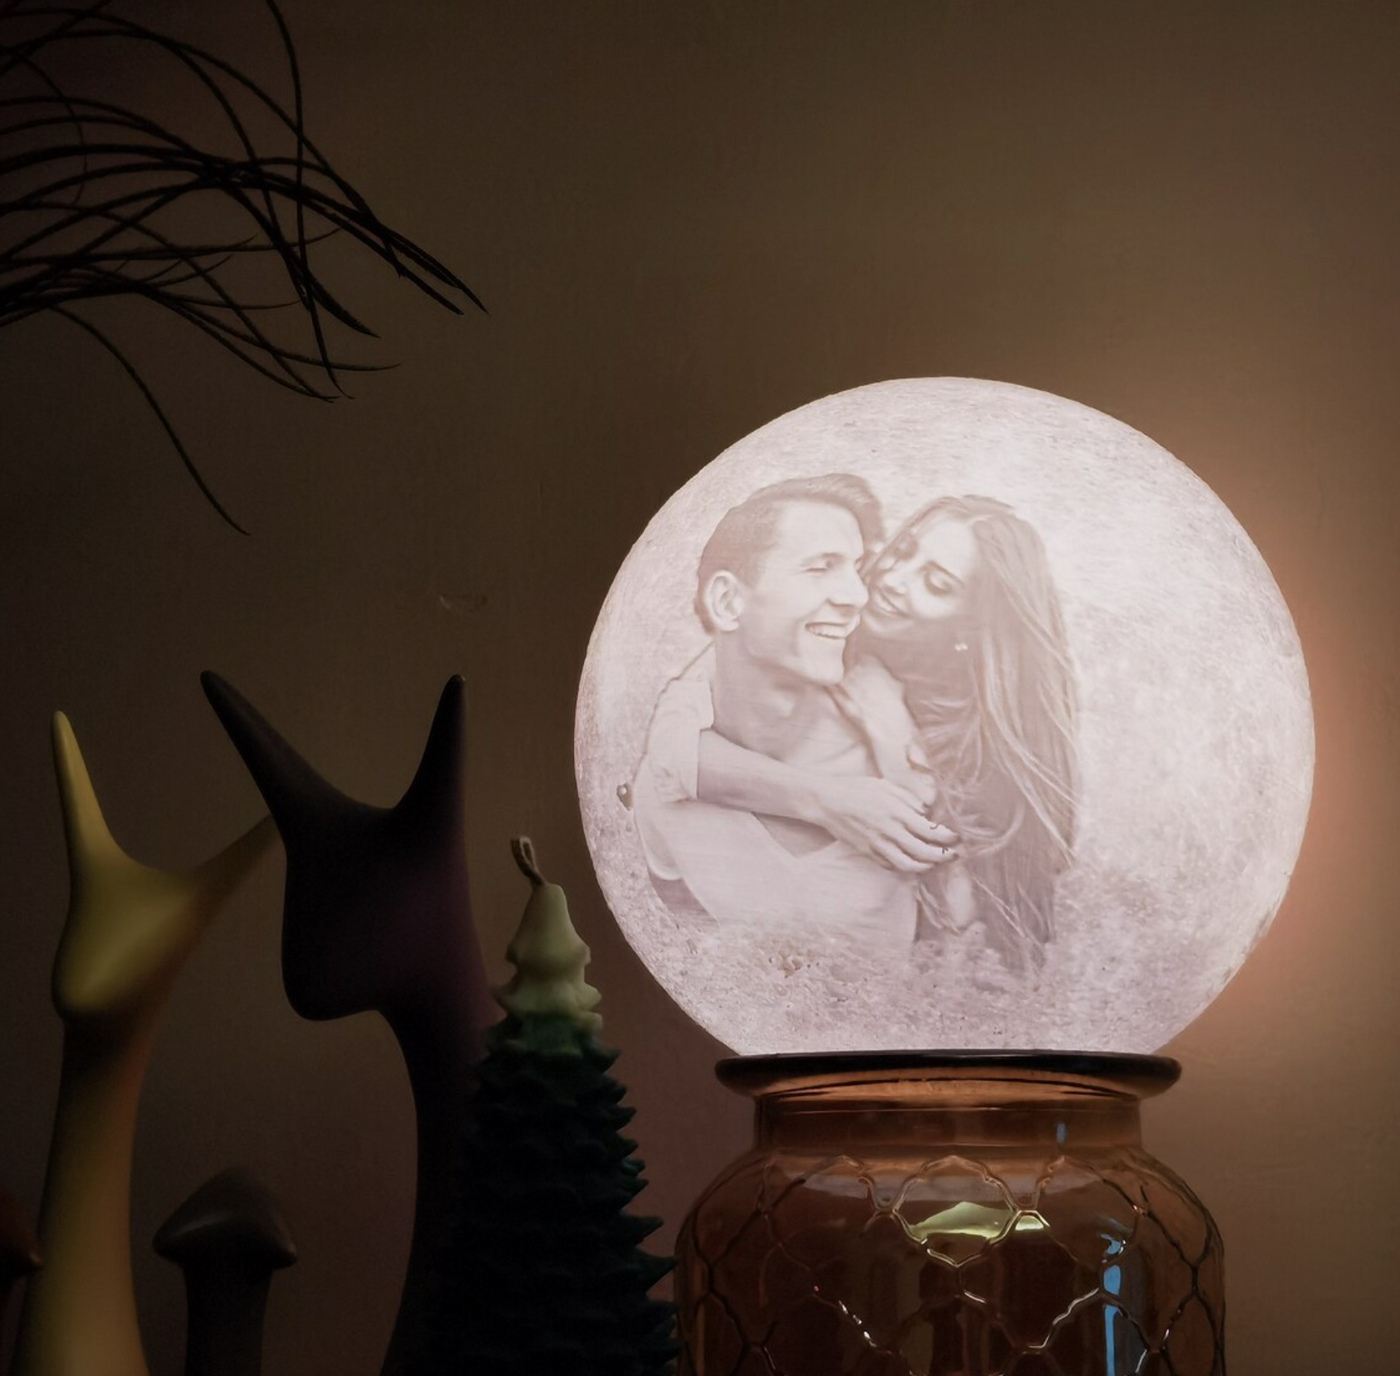 Personalized 3d Photo Printed Moon Lamp, Lunar Night, Picture Lamp, Christmas Gift, Photo Gifts Personalized Lamp Anniversary Birthday Gift